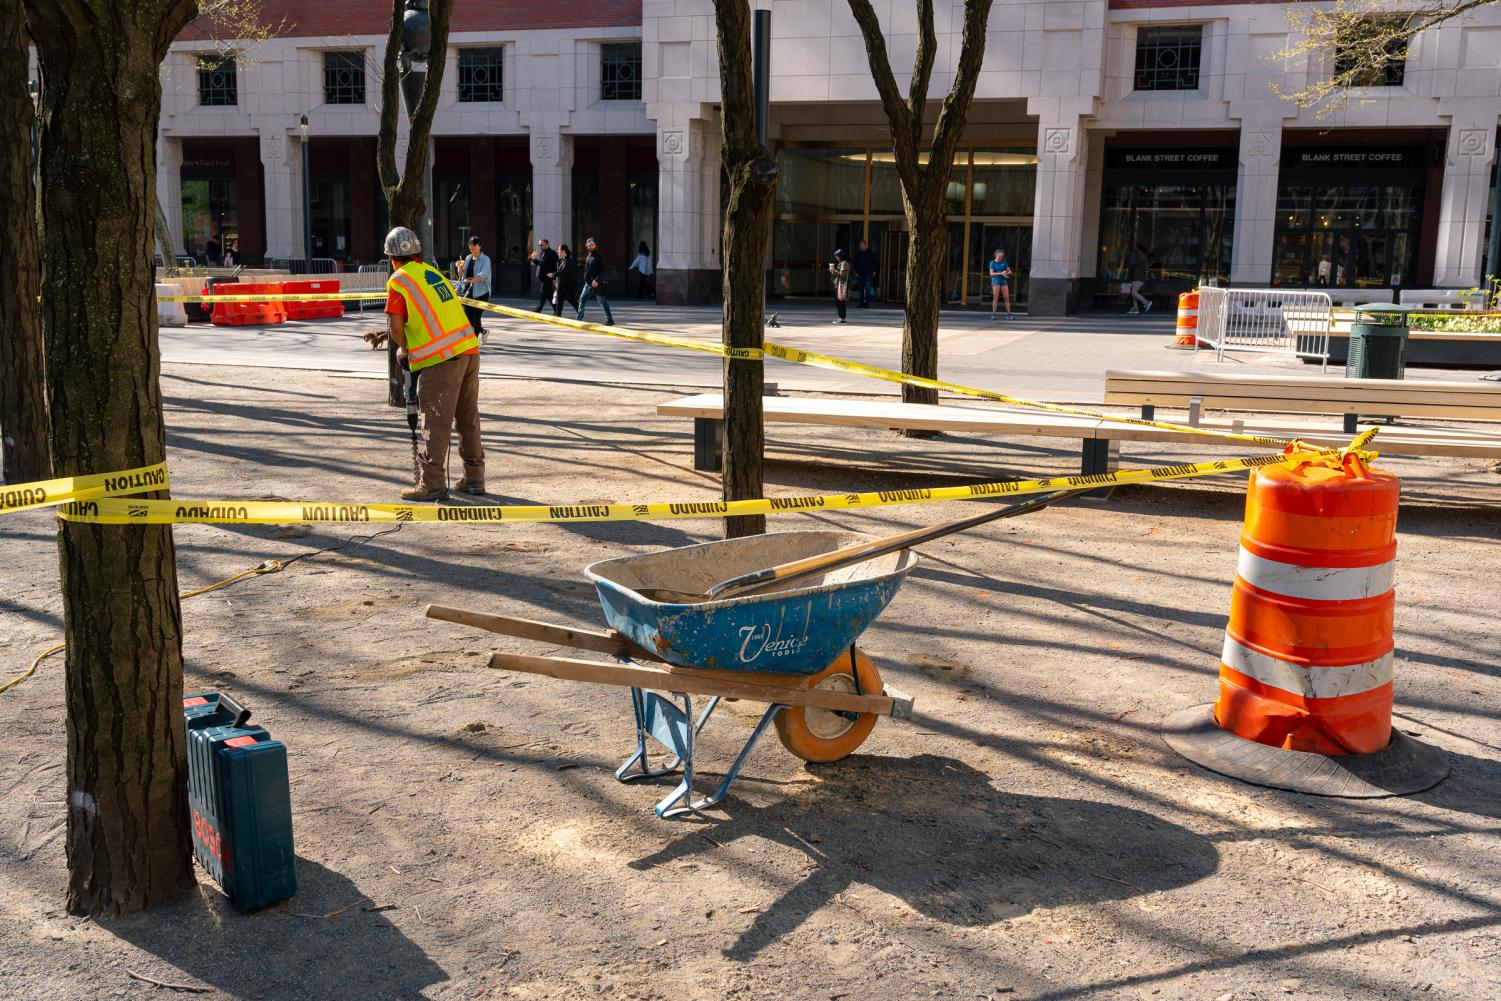 Construction work is being done in MetroTech’s park. There is a blue wheelbarrow (center), an orange construction item (right), and a construction worker in a reflective jacket (left) appearing to be working.